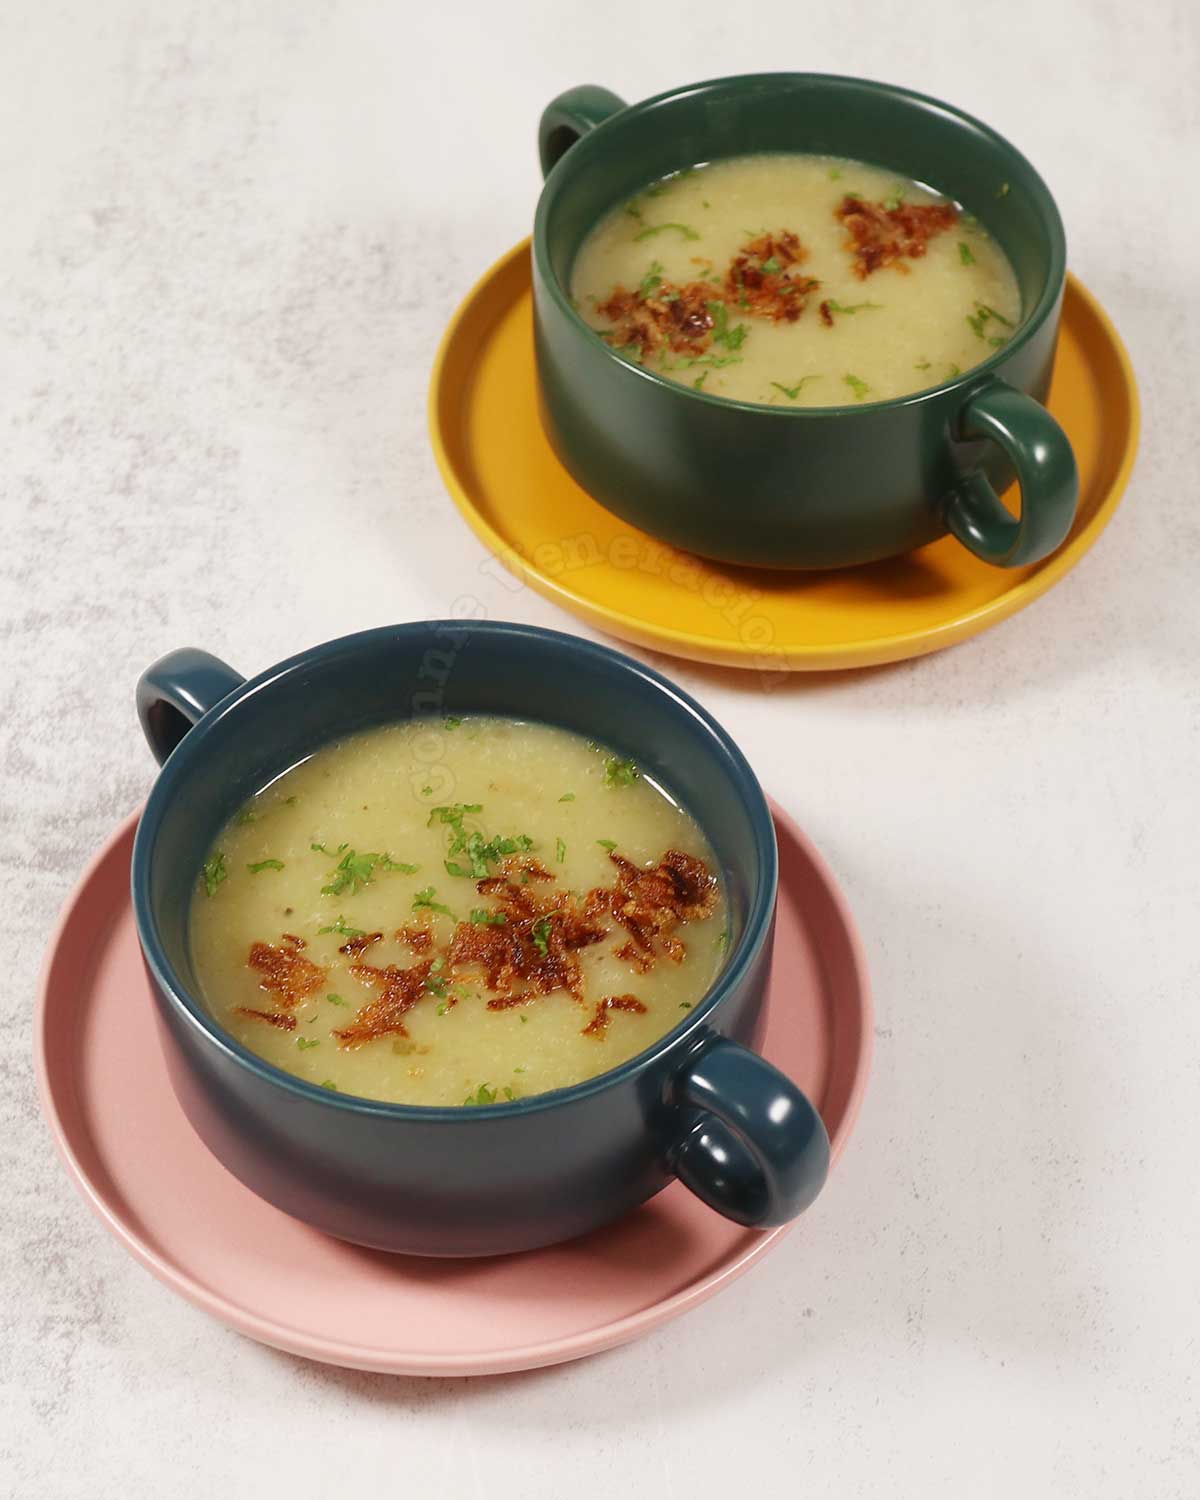 Two bowls of Pureed leeks and potato soup garnished with fried shallots